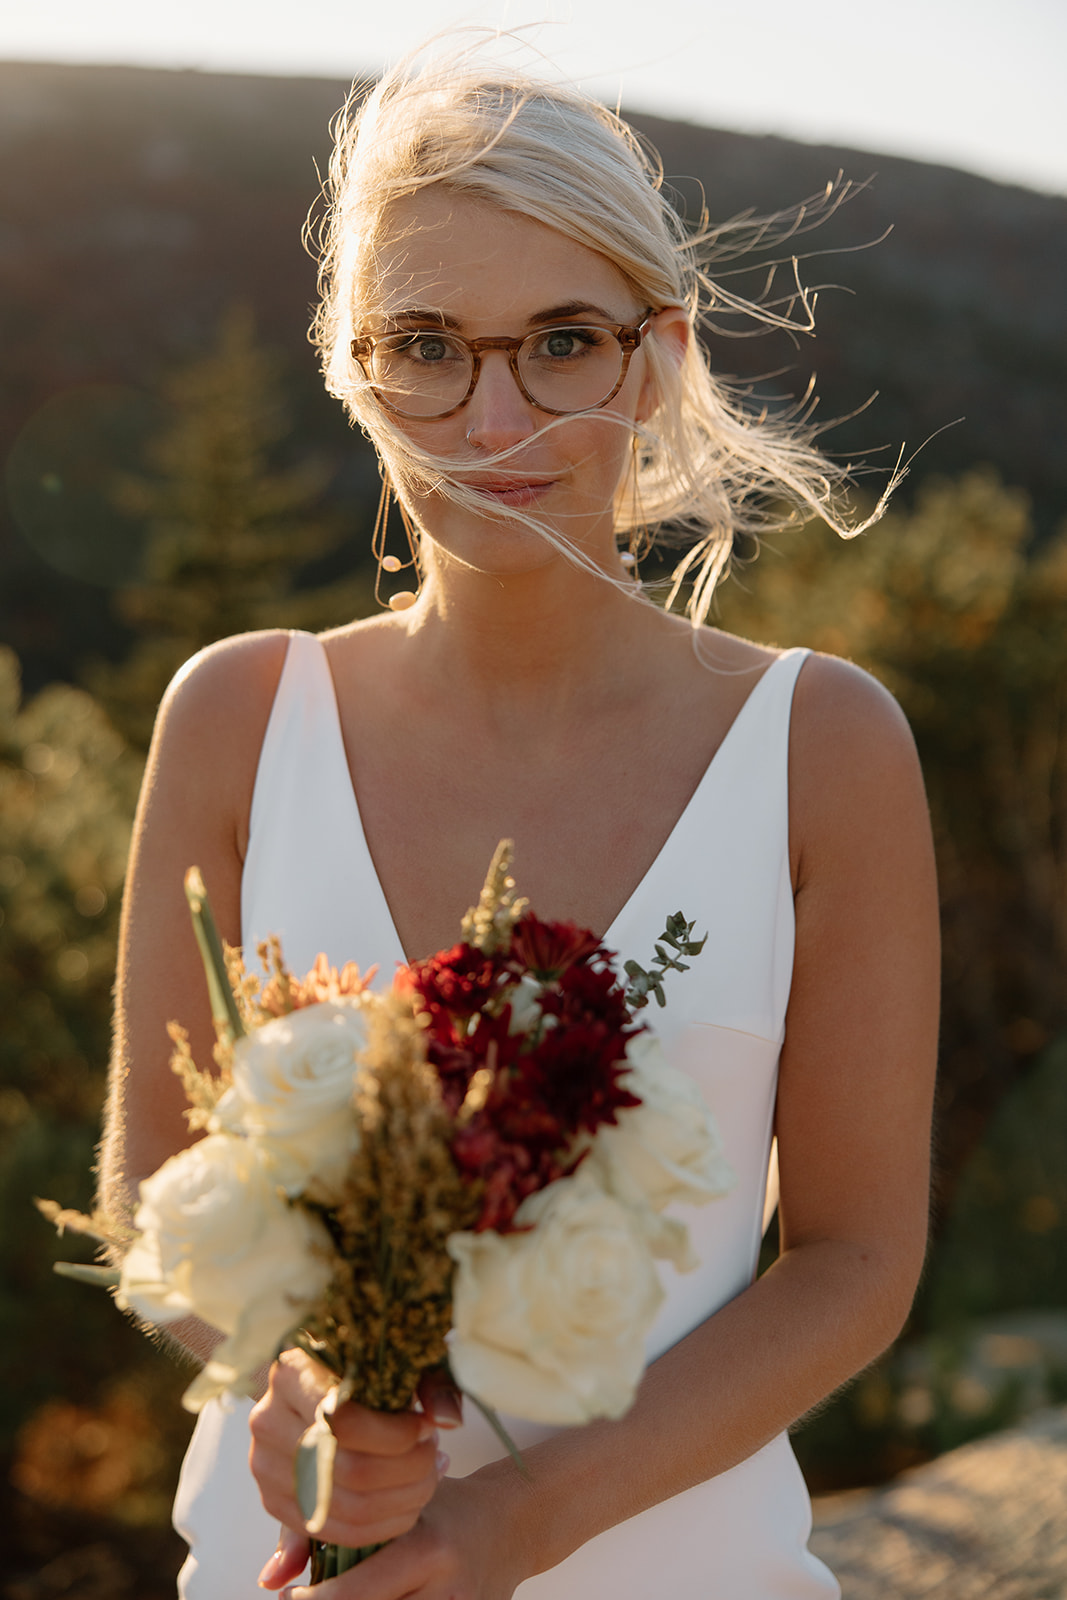 Bubble rock elopement and vows in the Fall. Acadia national park elopement and microwedding. Bride portrait.